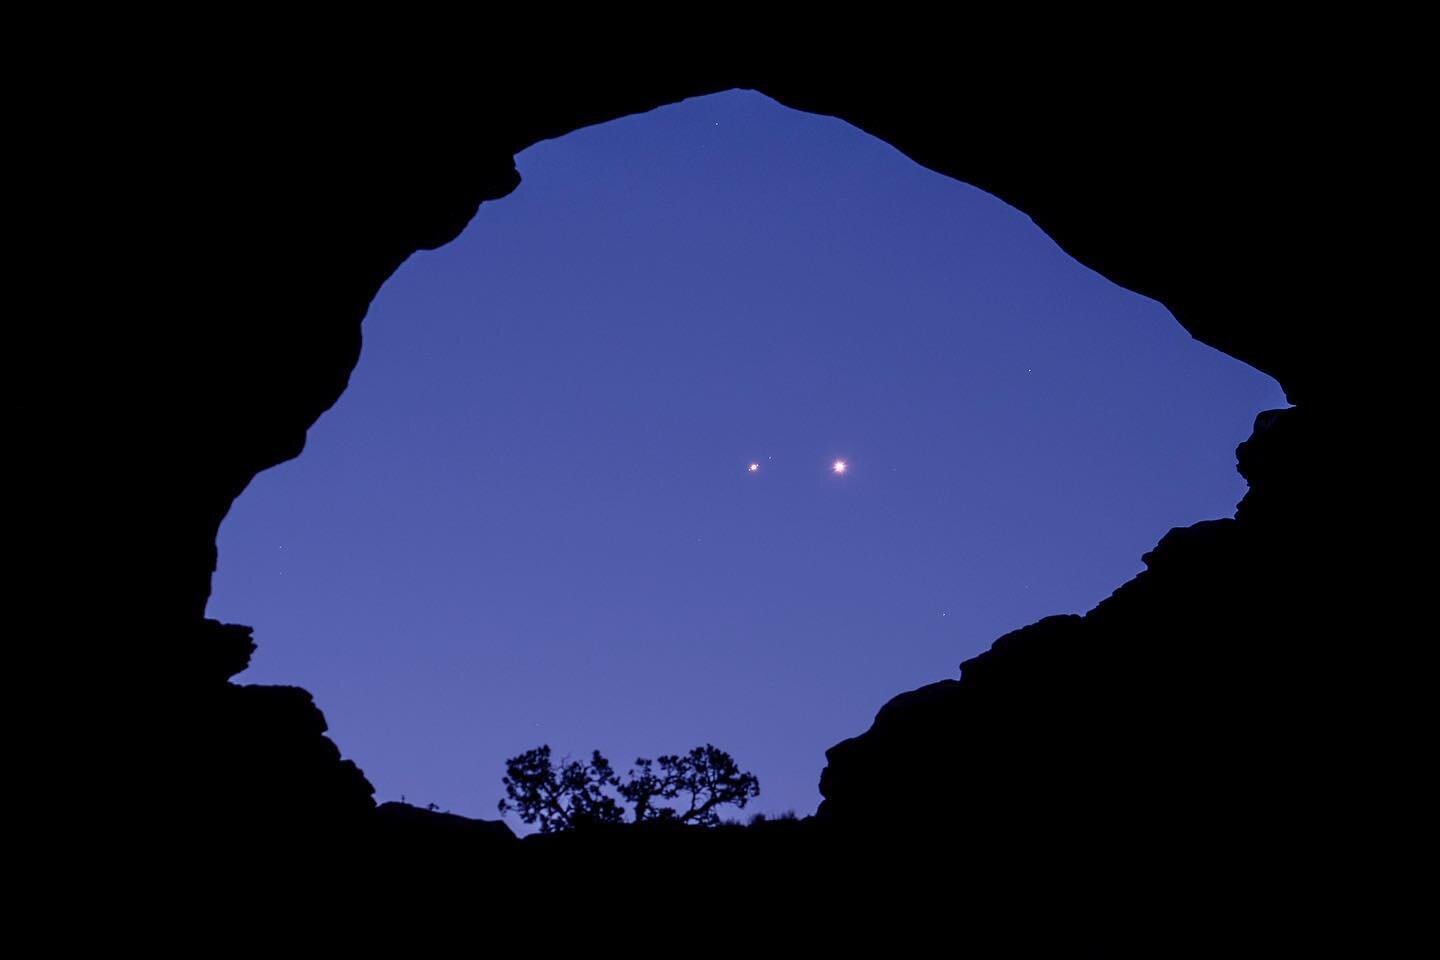 Serendipity knocks - I was aware of the Jupiter/Venus planetary conjunction of April 30, but thought I would miss it owing to the massive rock arch blocking my morning view to the east. I had just finished an all-night imaging session in Arches Natio